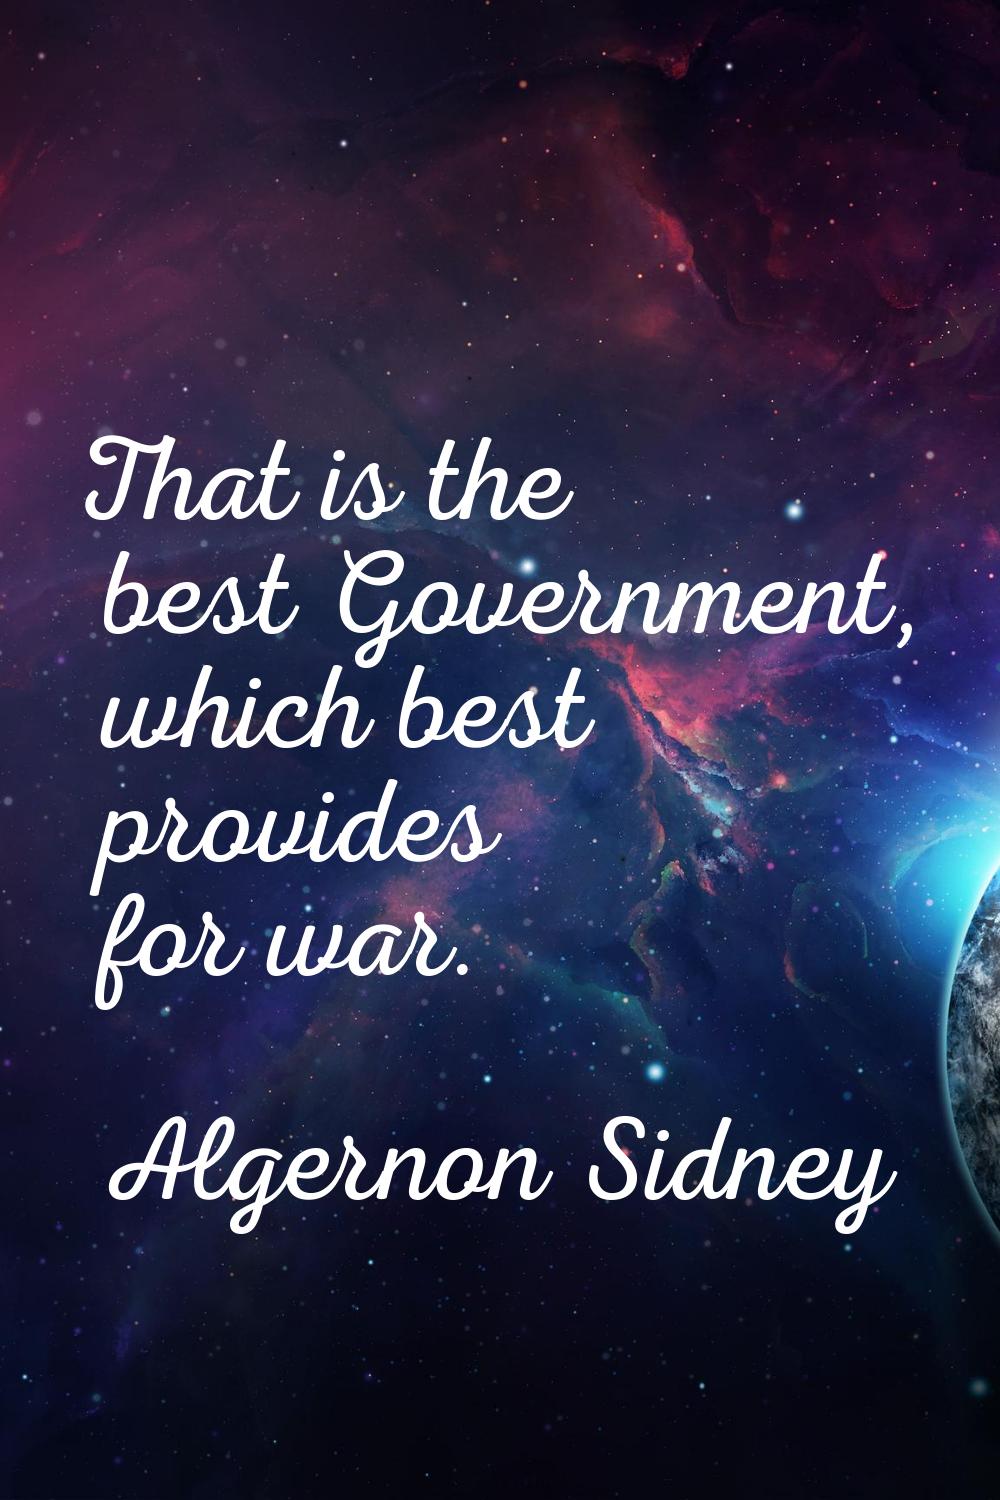 That is the best Government, which best provides for war.